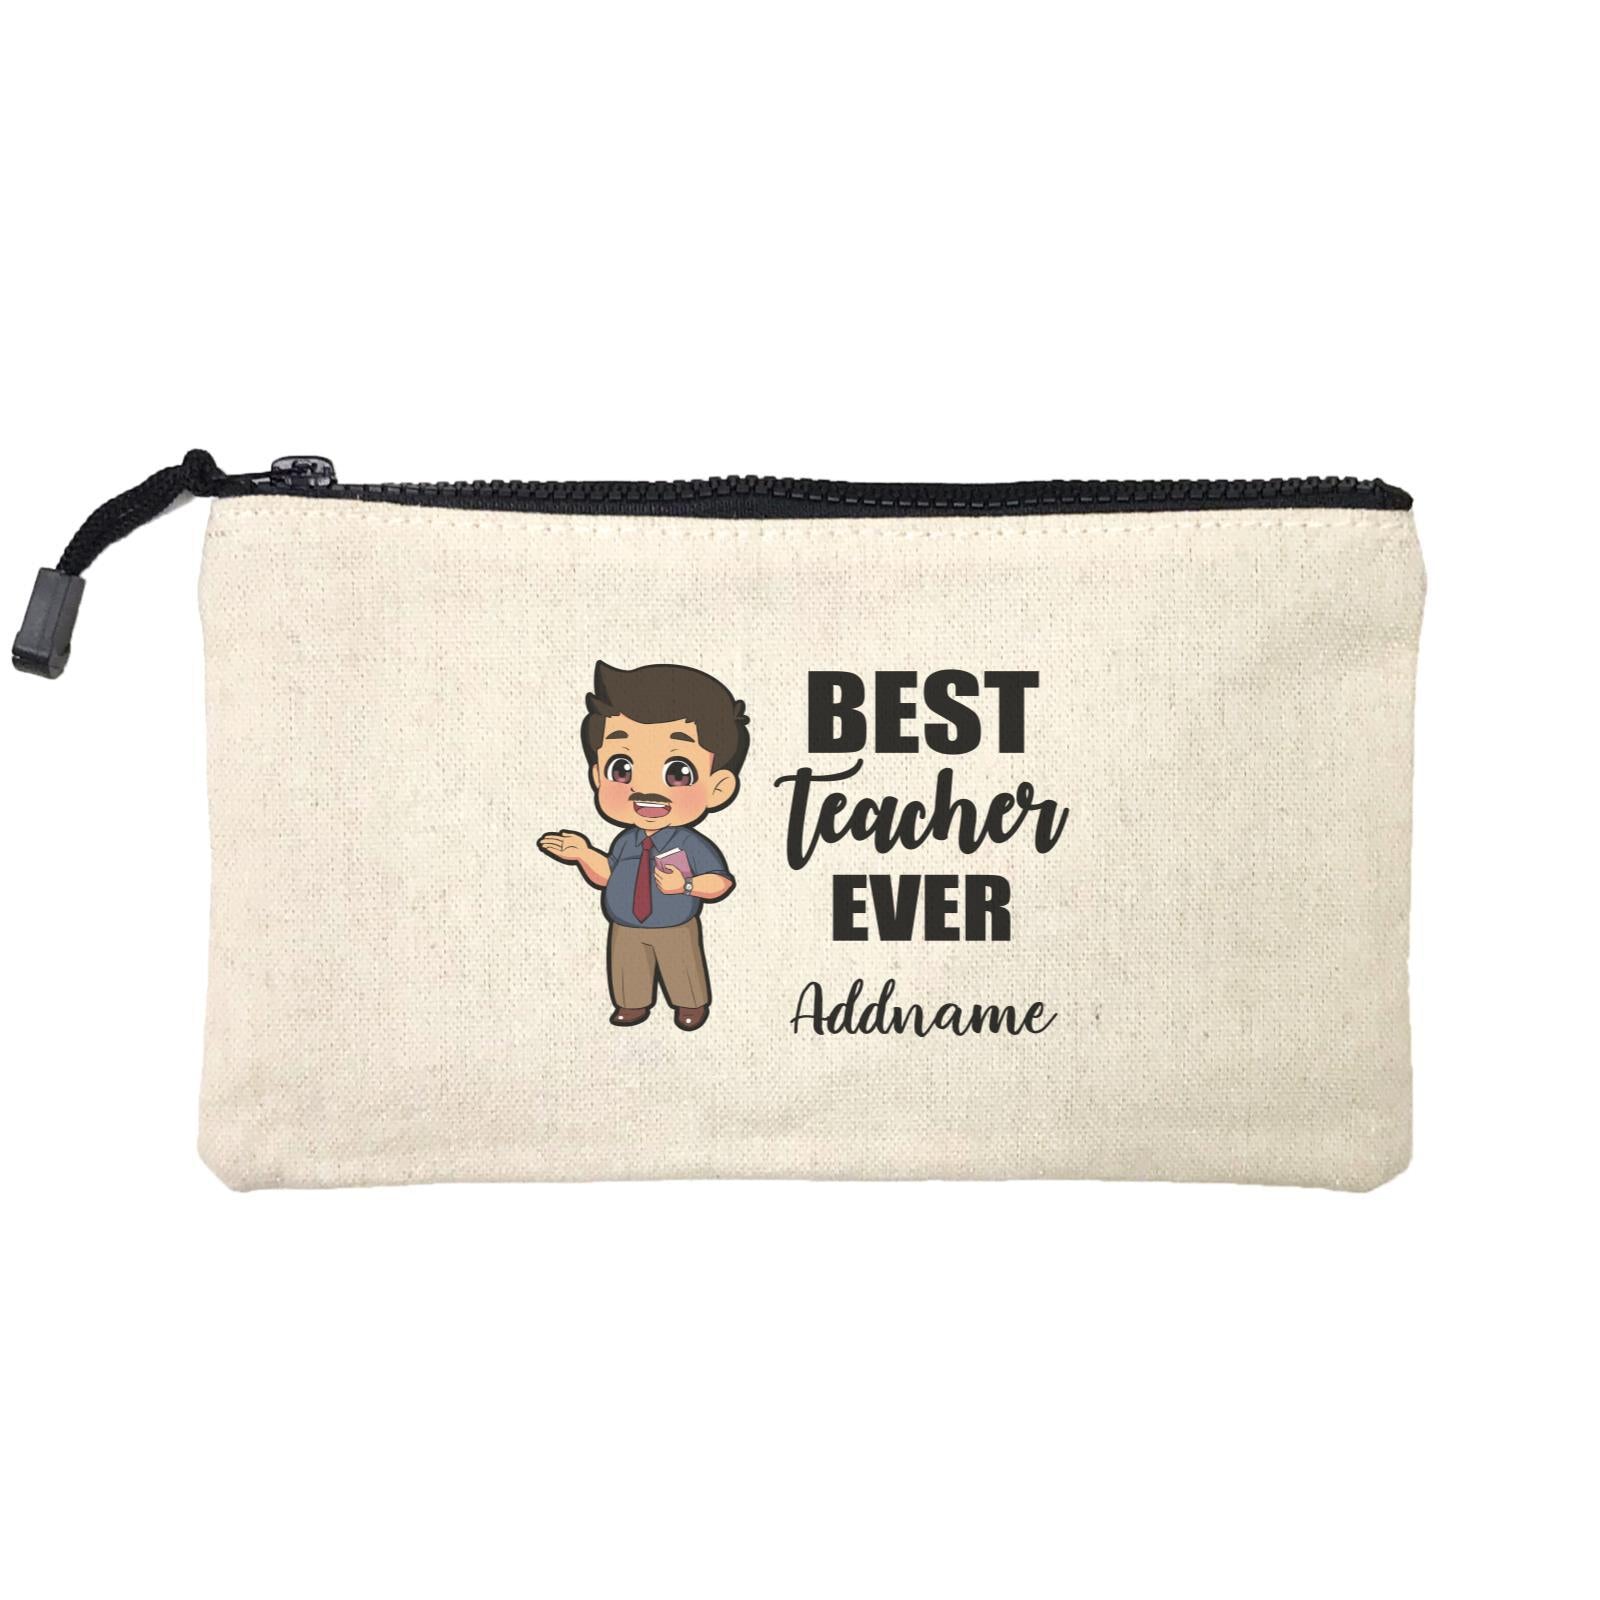 Chibi Teachers Chubby Male Best Teacher Ever Addname Mini Accessories Stationery Pouch